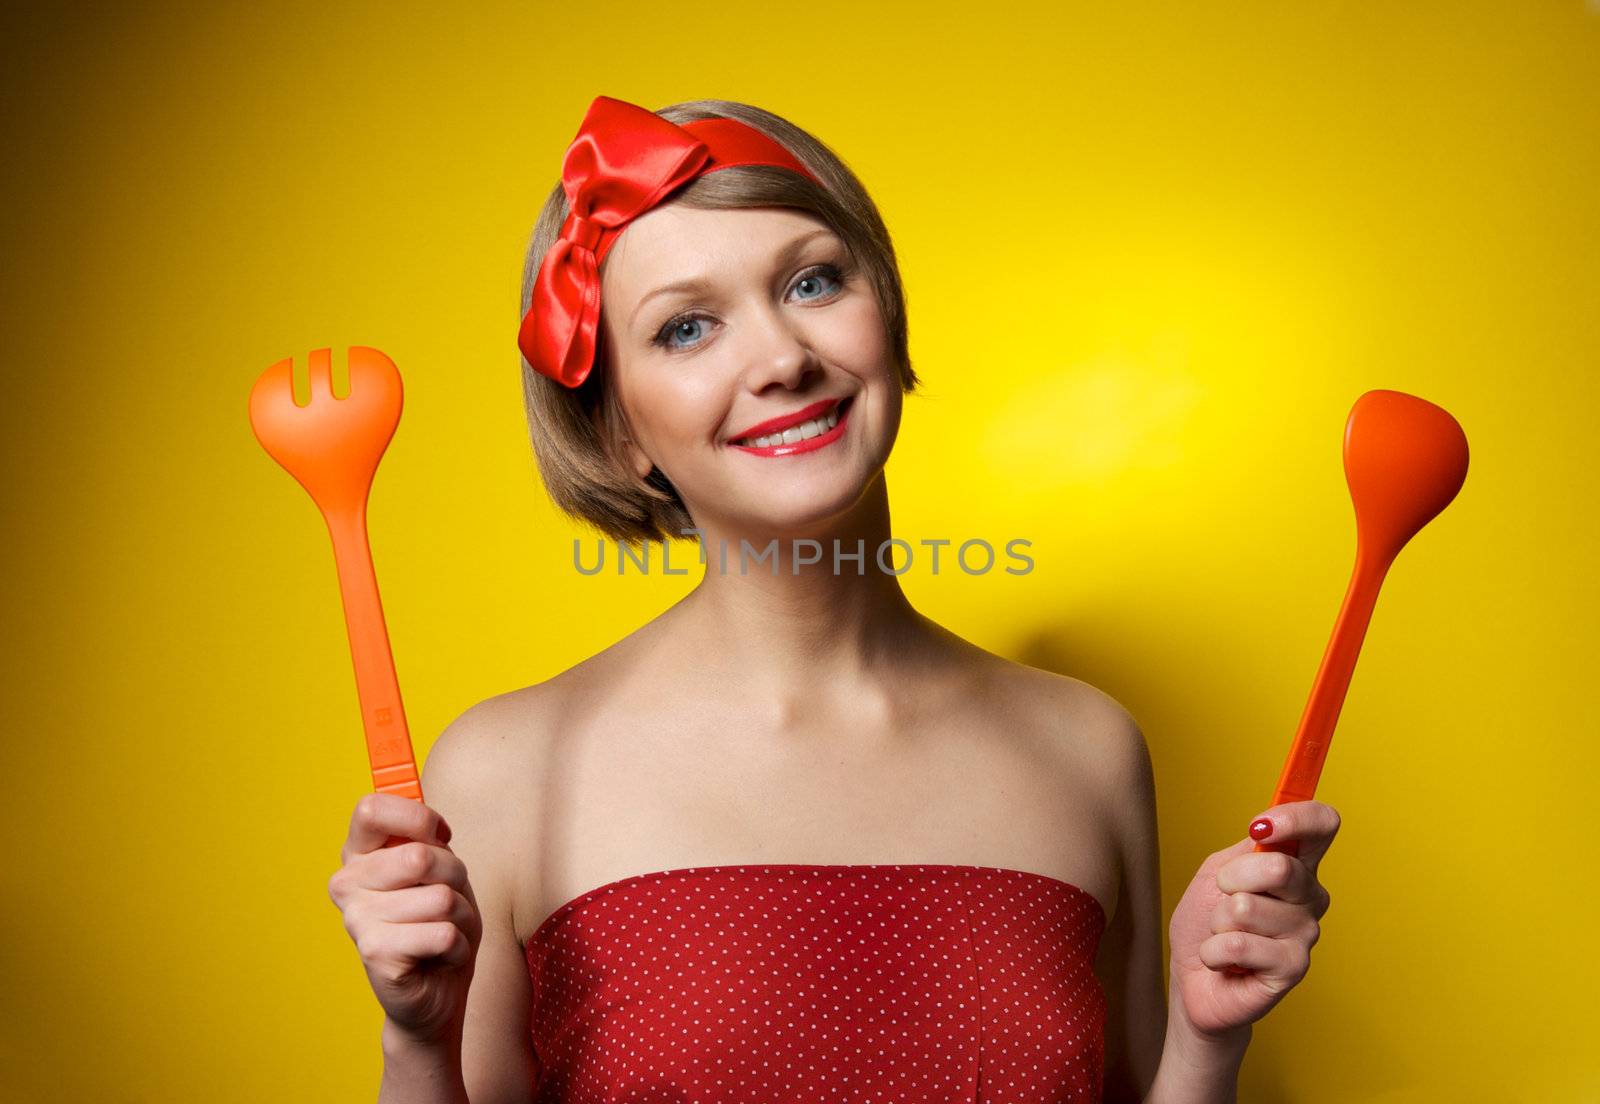 Pinup style housewife with kitchen utensils by kirs-ua